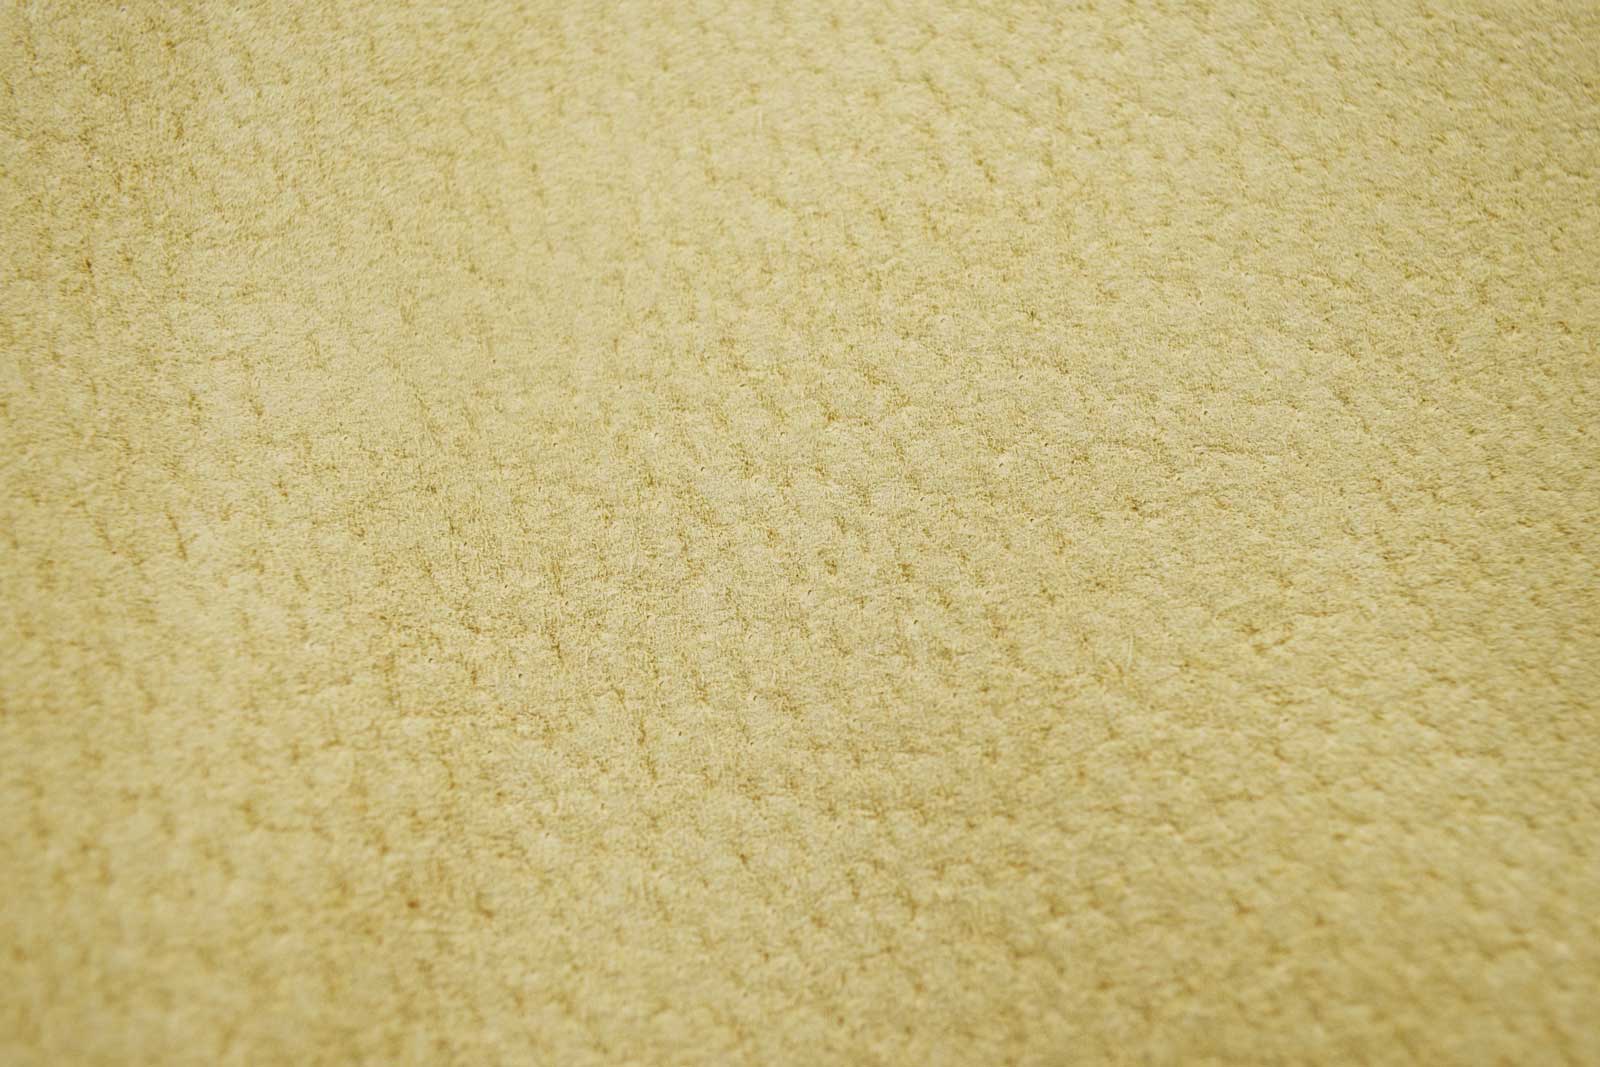 Texture of beige pigskin lining leather  